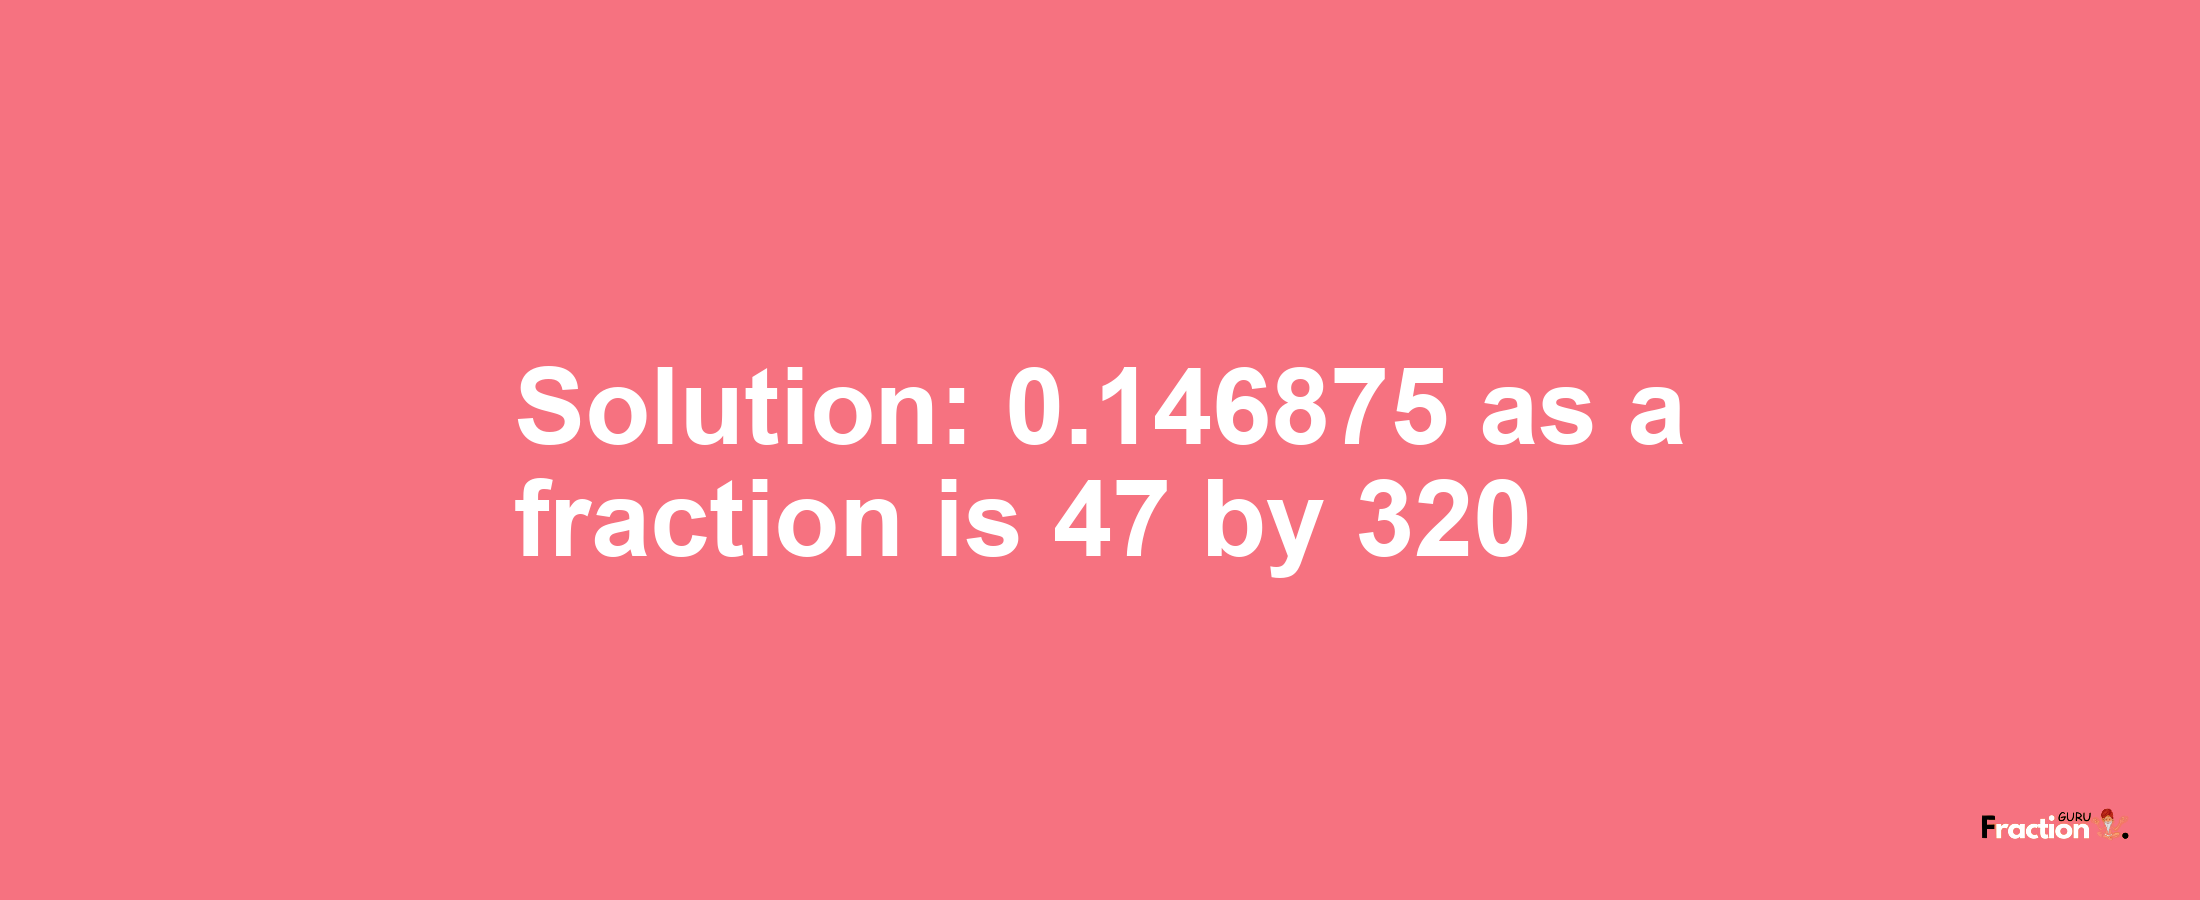 Solution:0.146875 as a fraction is 47/320